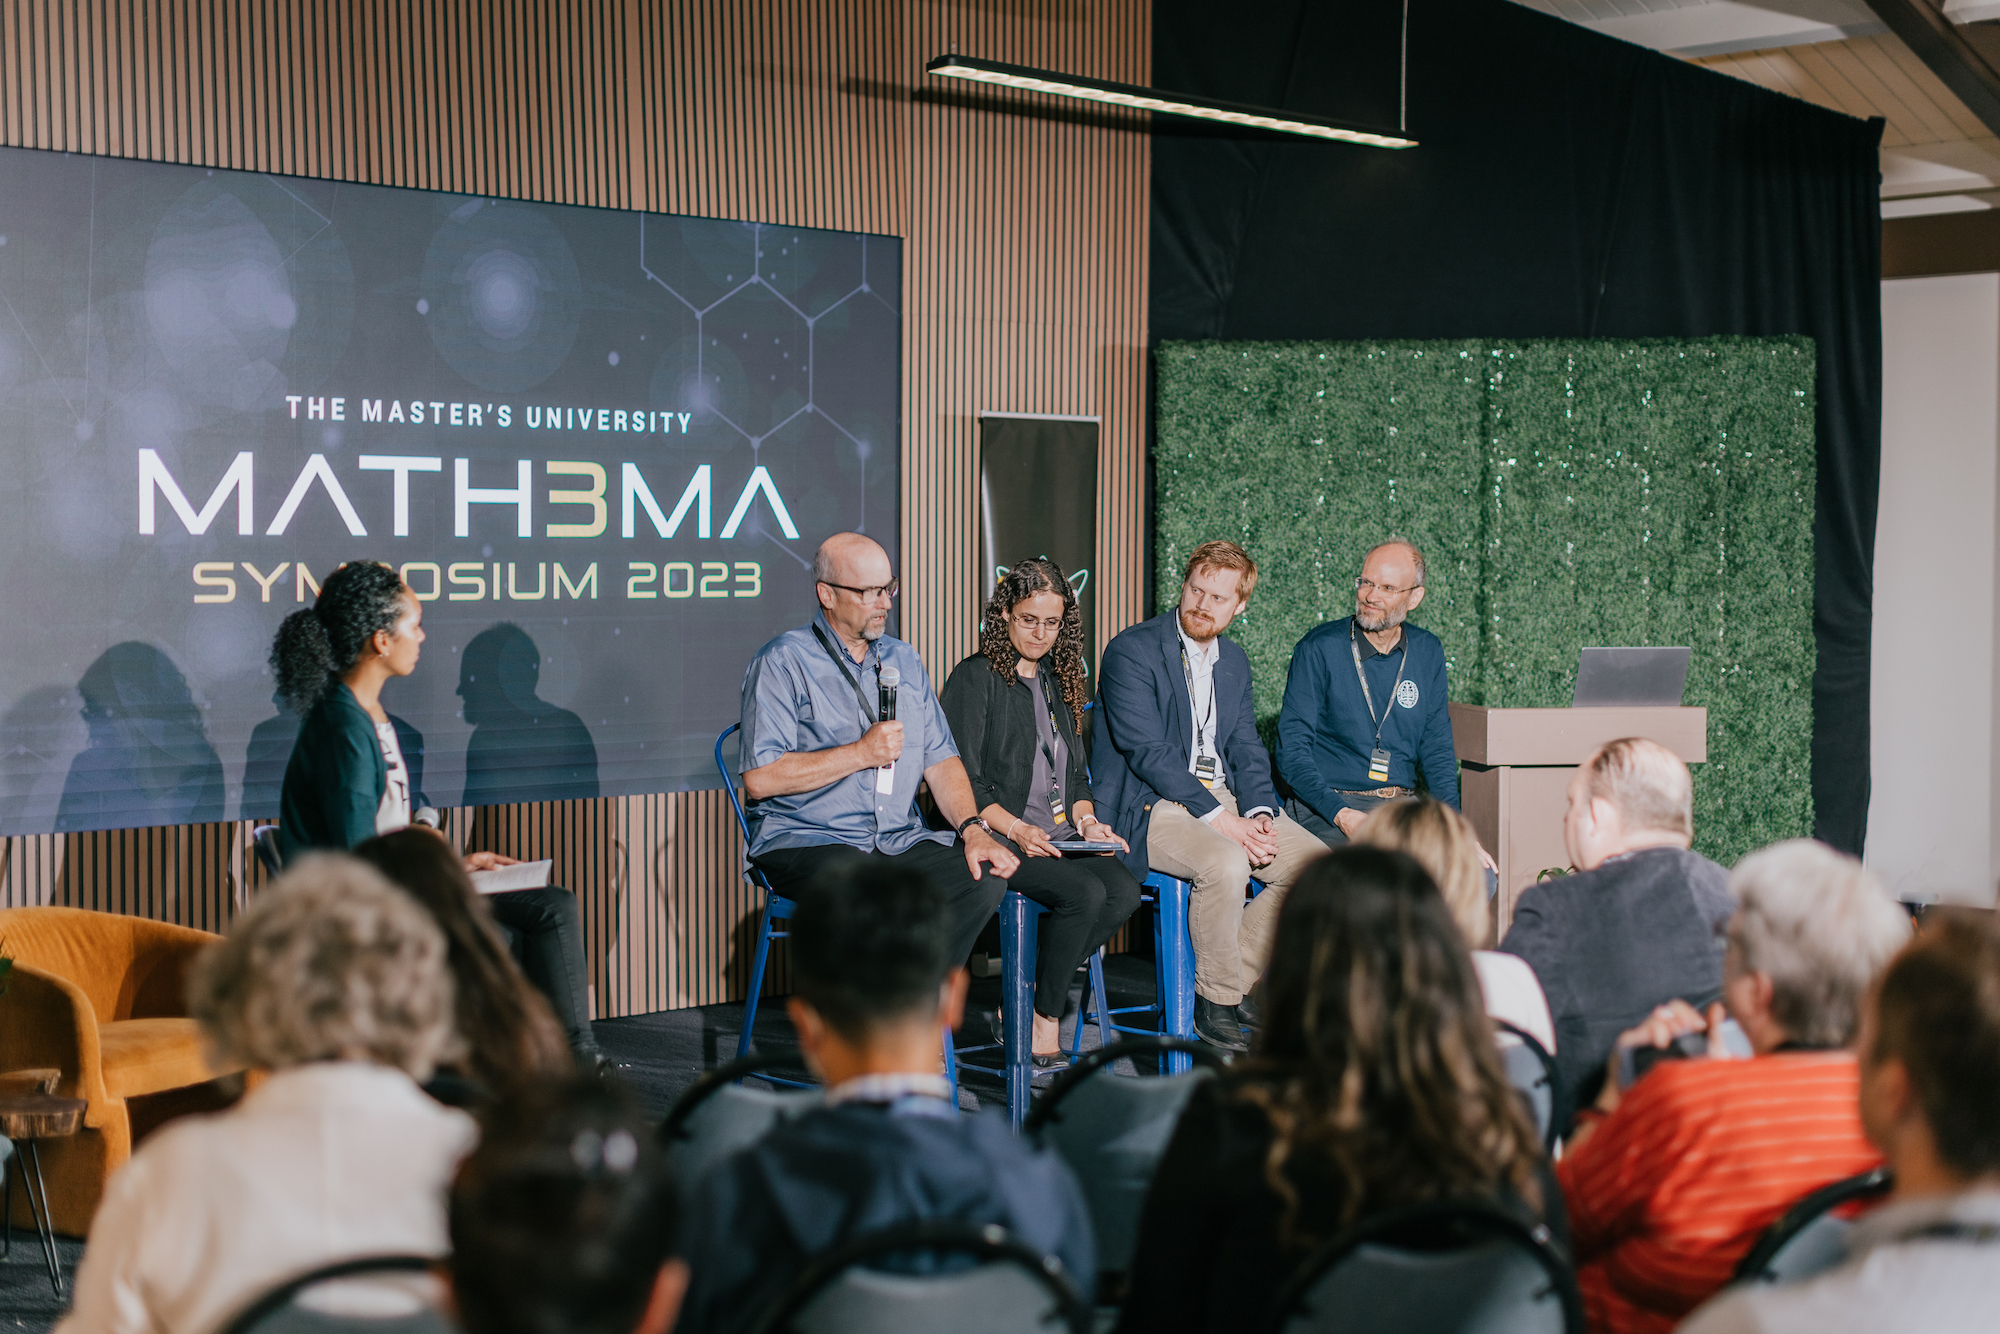 Three Takeaways from Math3ma Symposium 2023 Featured Image